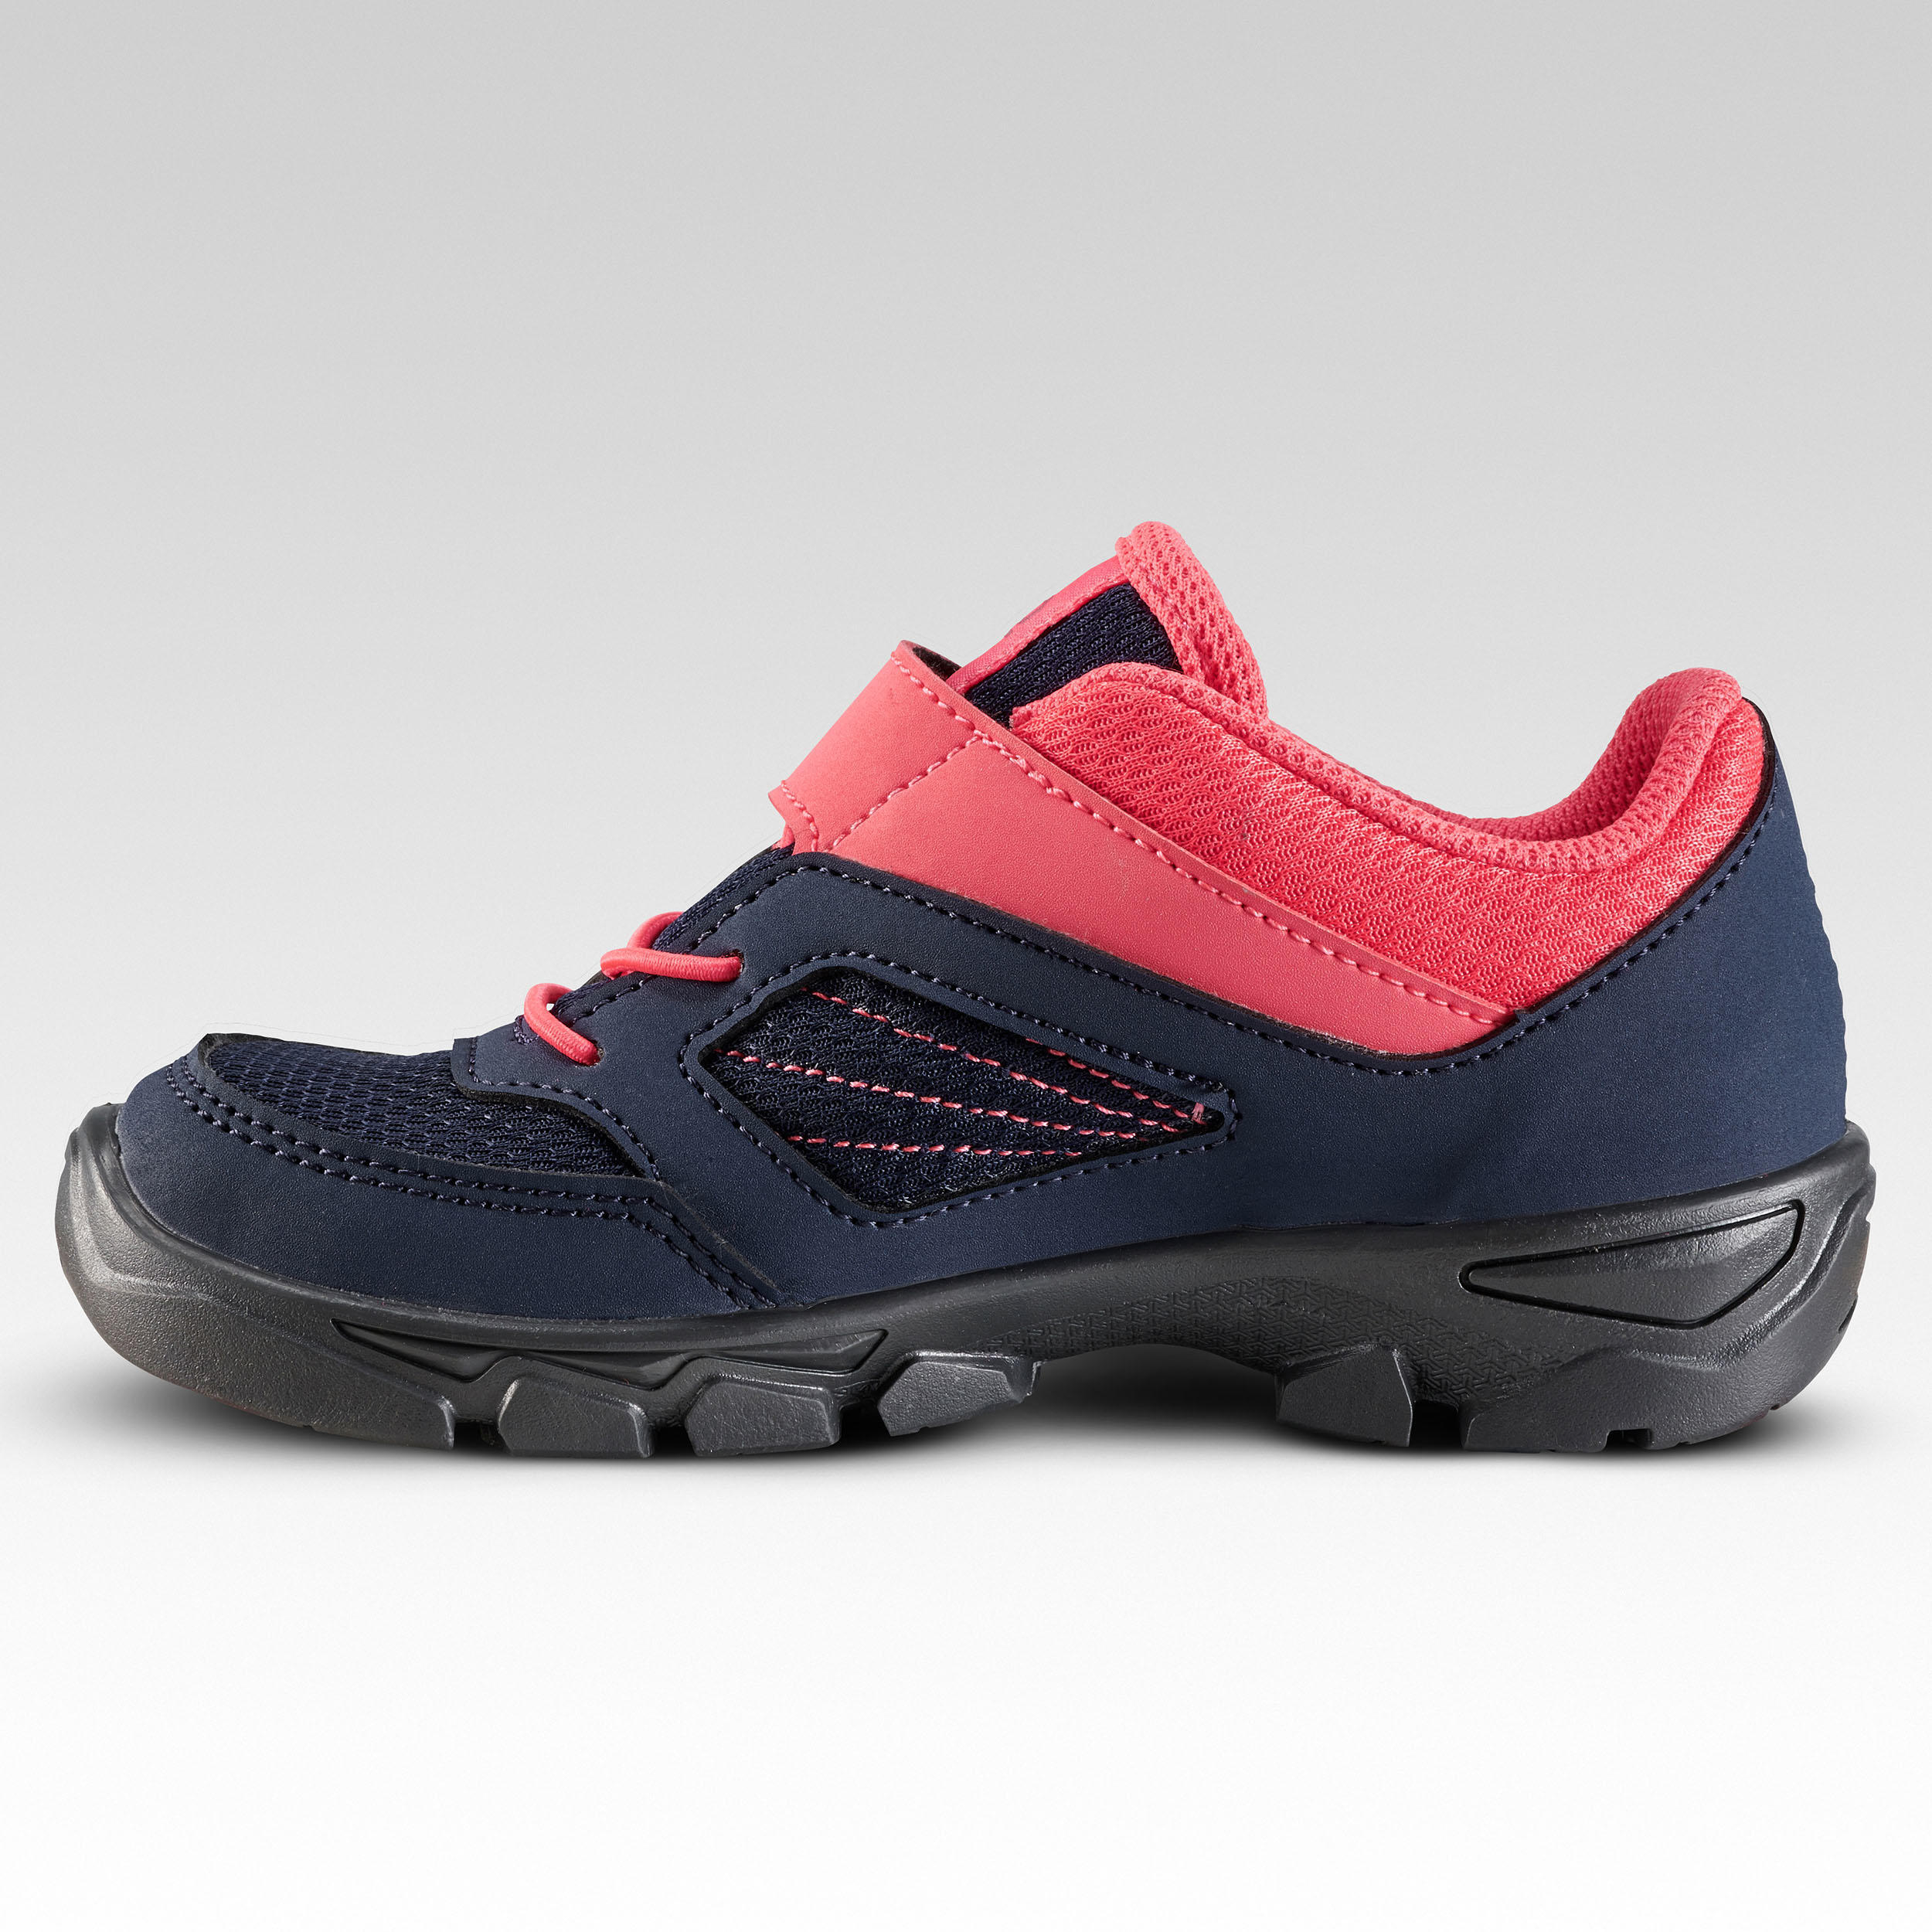 Kids’ Hiking Shoes with Rip-tab MH100 from Jr size 7 to Adult size 2 Blue & Pink 4/8